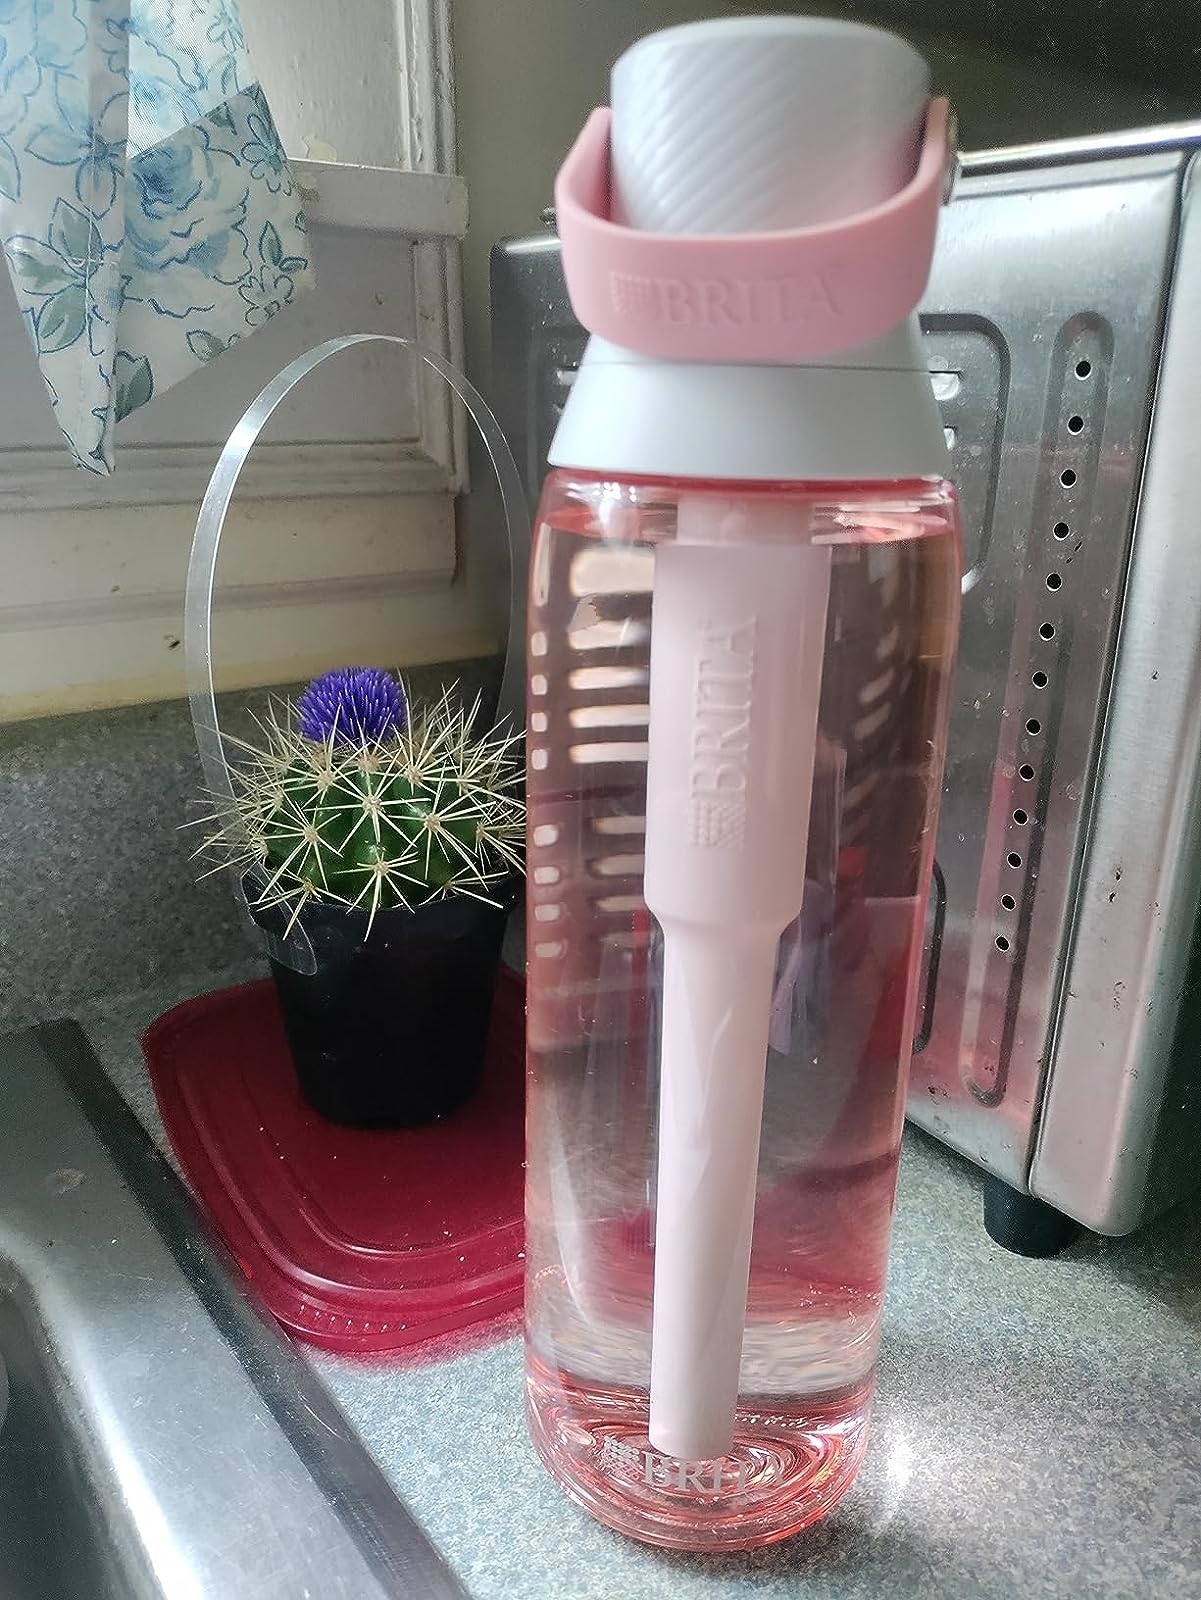 Reviewer image of the pink bottle filled with water